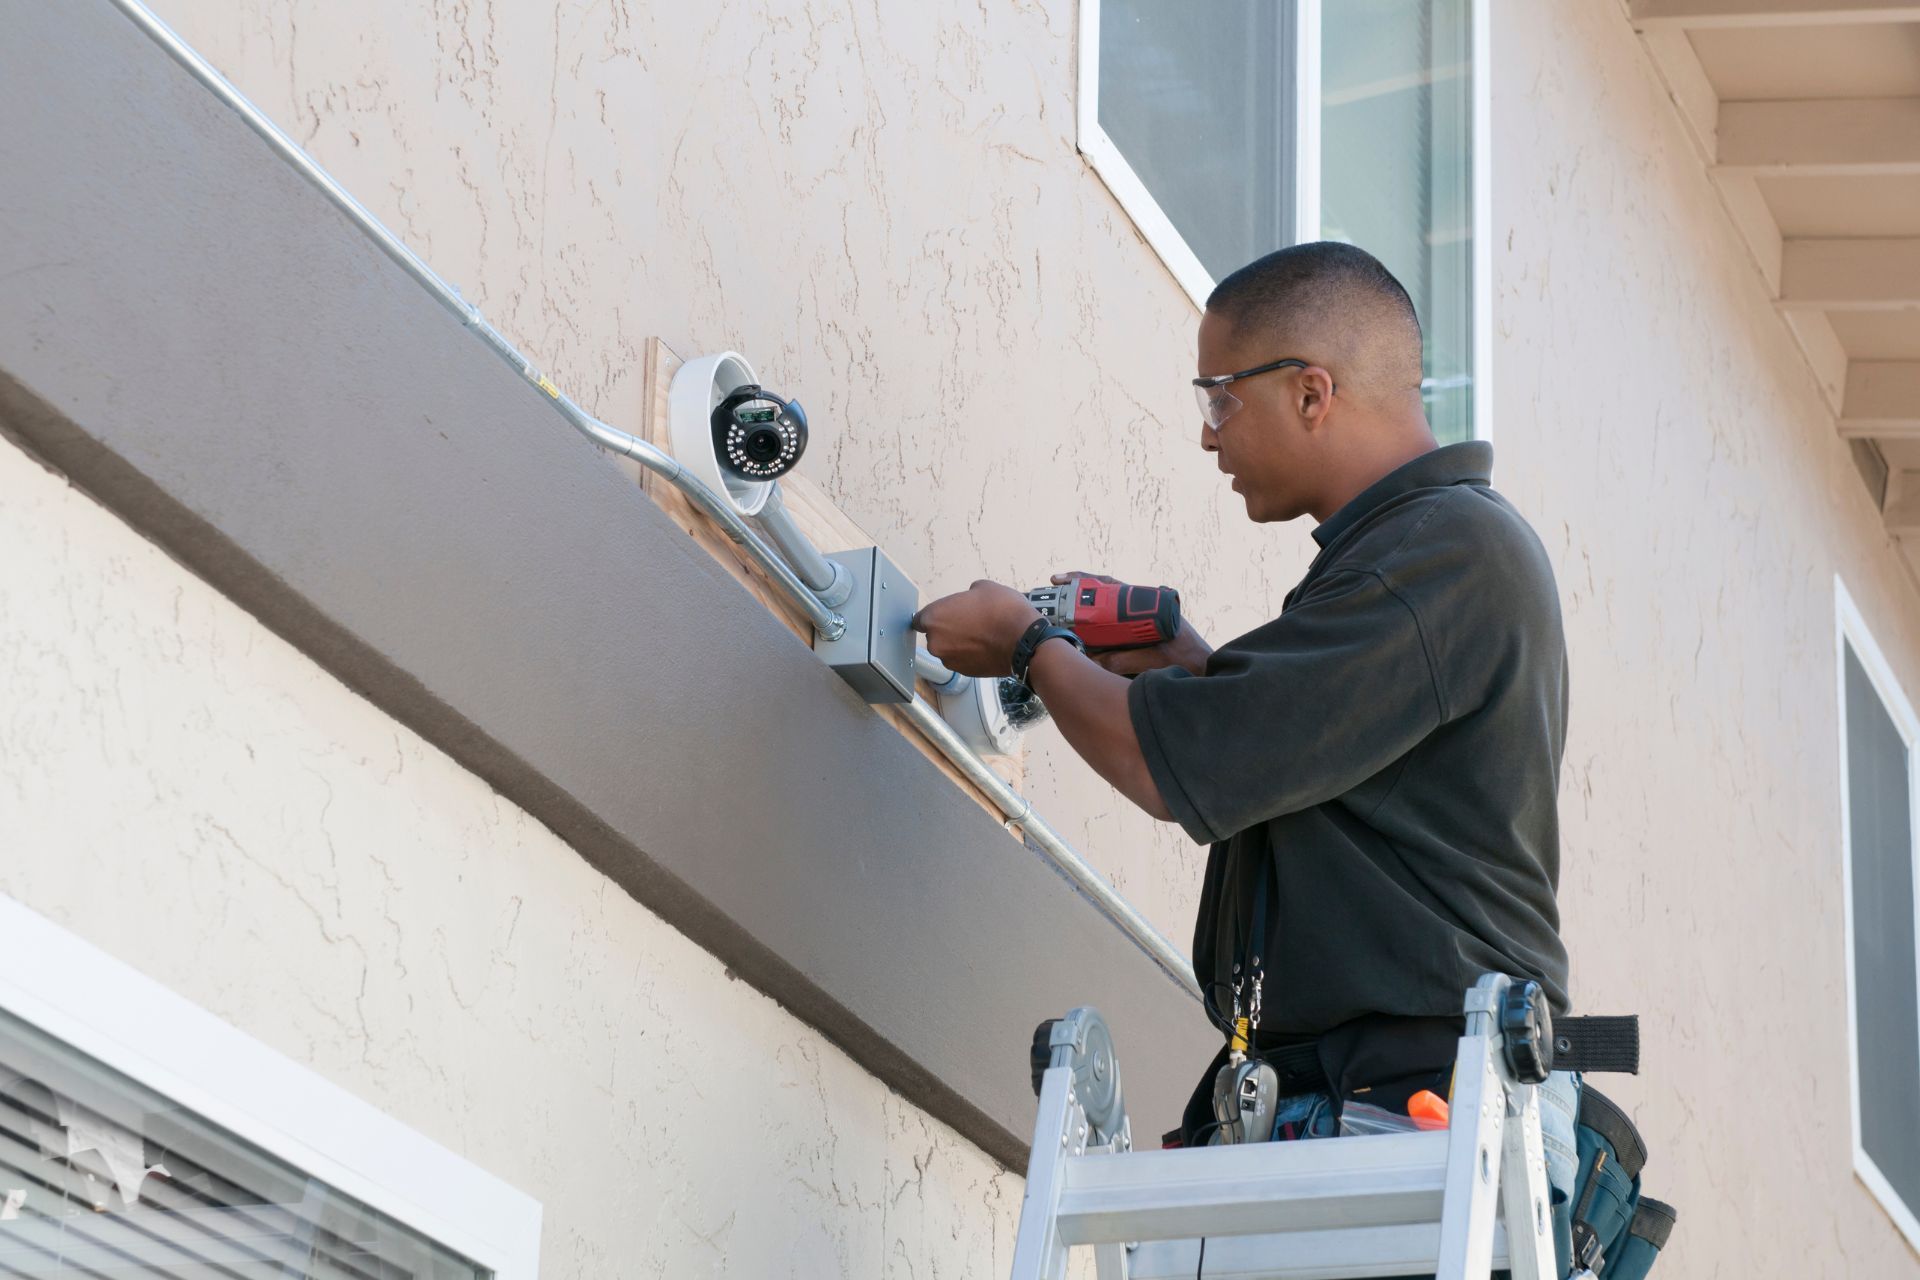 A technician installs a security camera securely on a home’s exterior wall